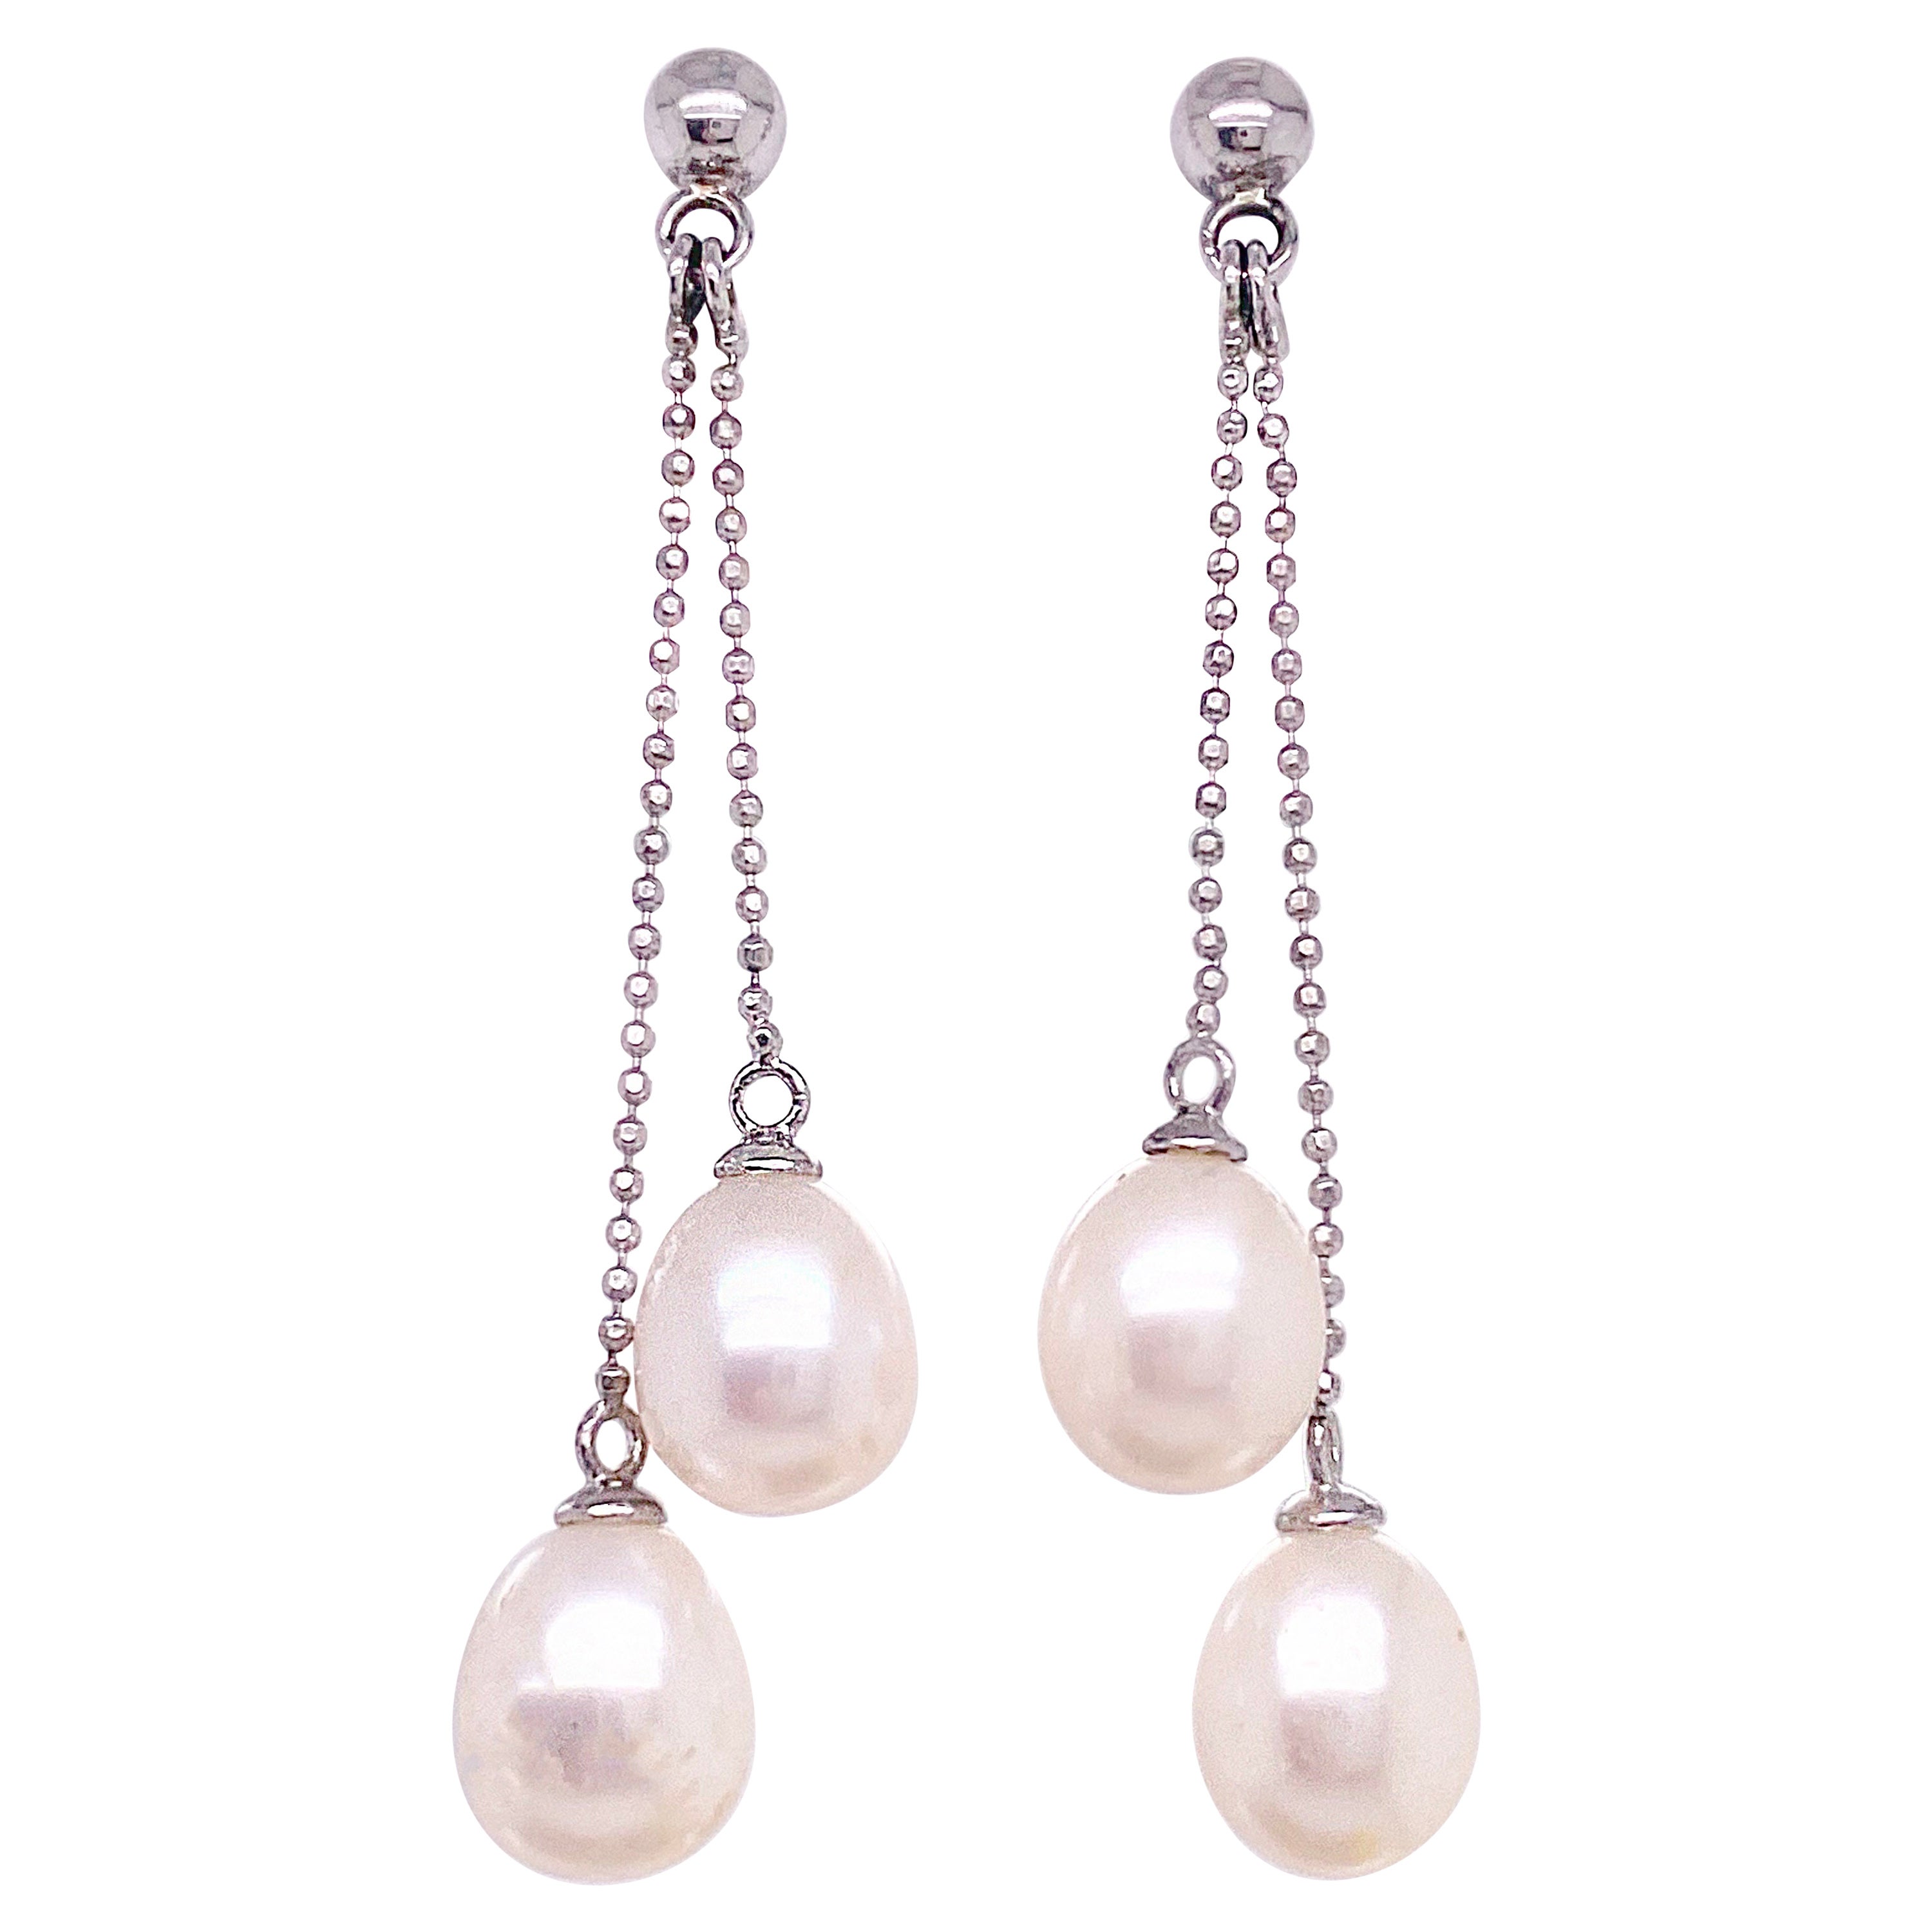 Double Pearl Dangle Earrings, Two Strand Dangle High Luster Cultured Pearls